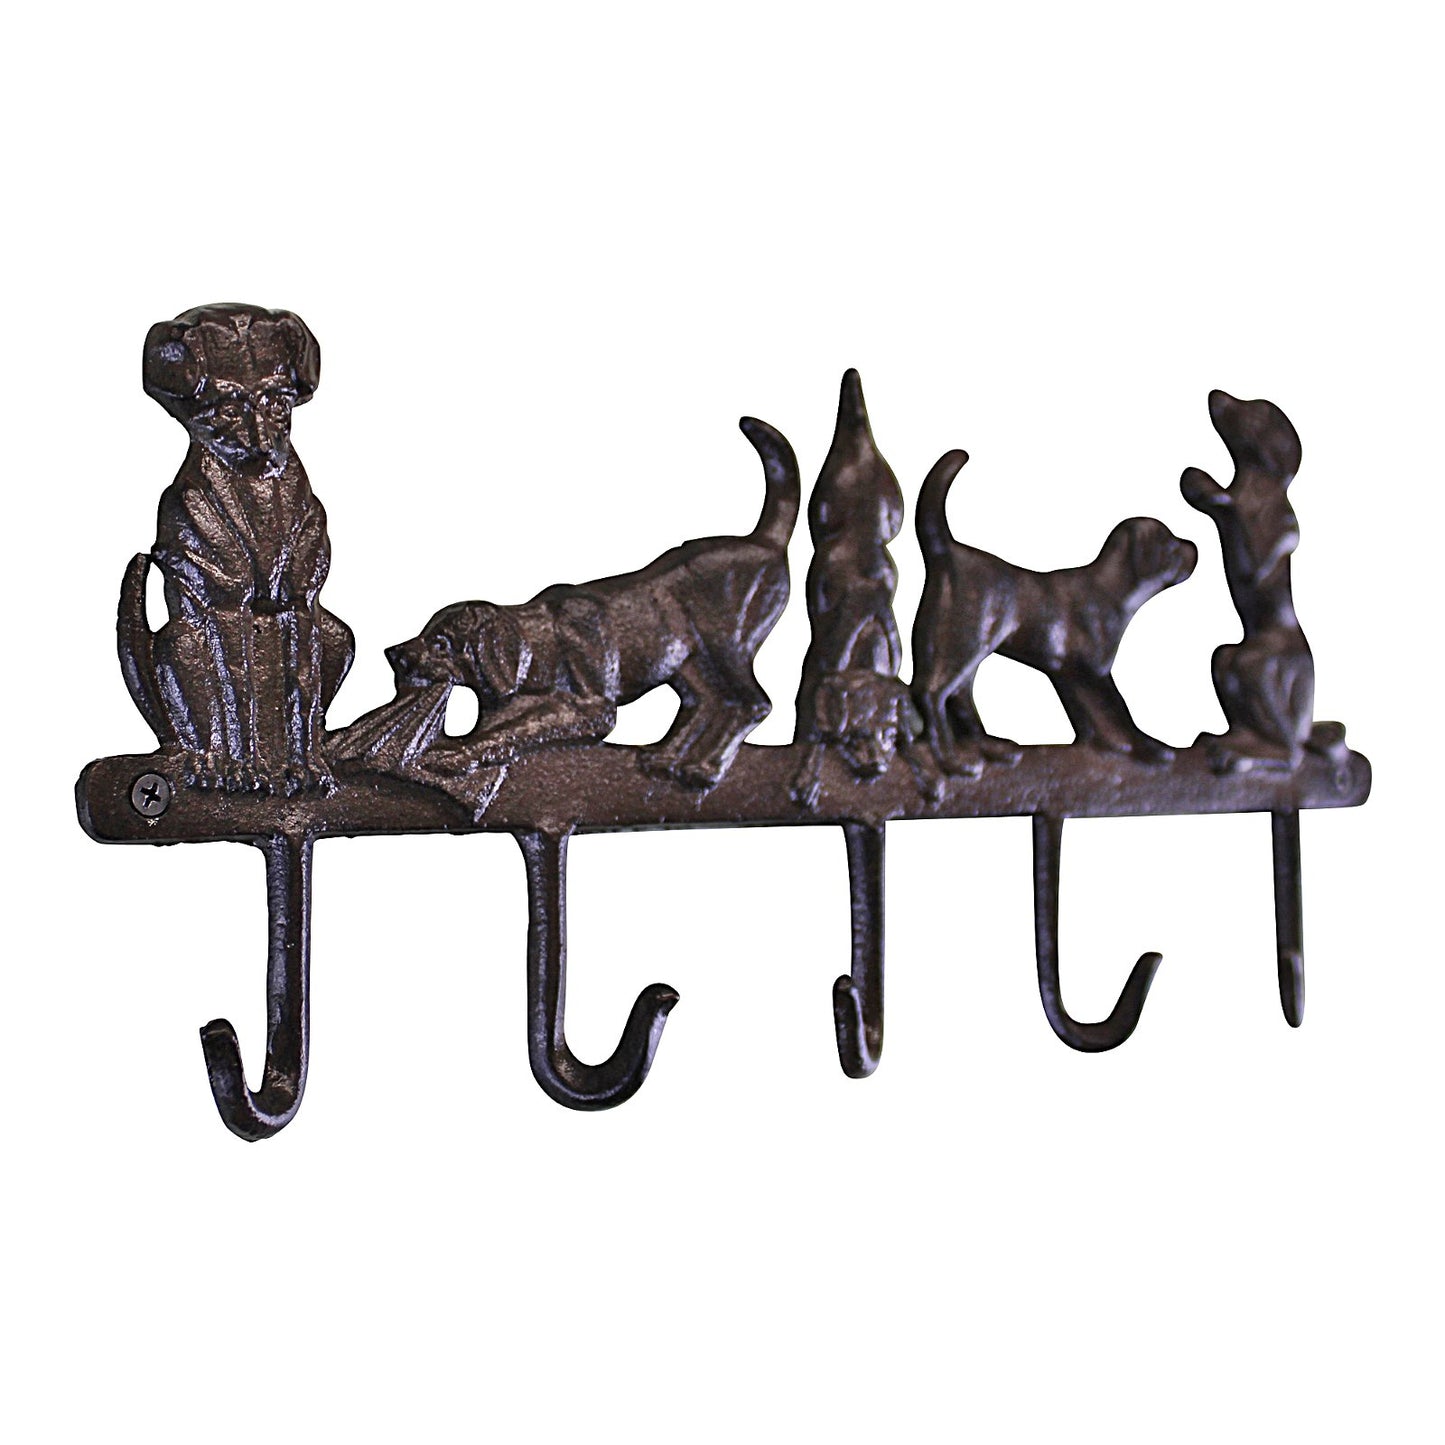 Rustic Cast Iron Wall Hooks, Playful Dog Design With 5 Hooks